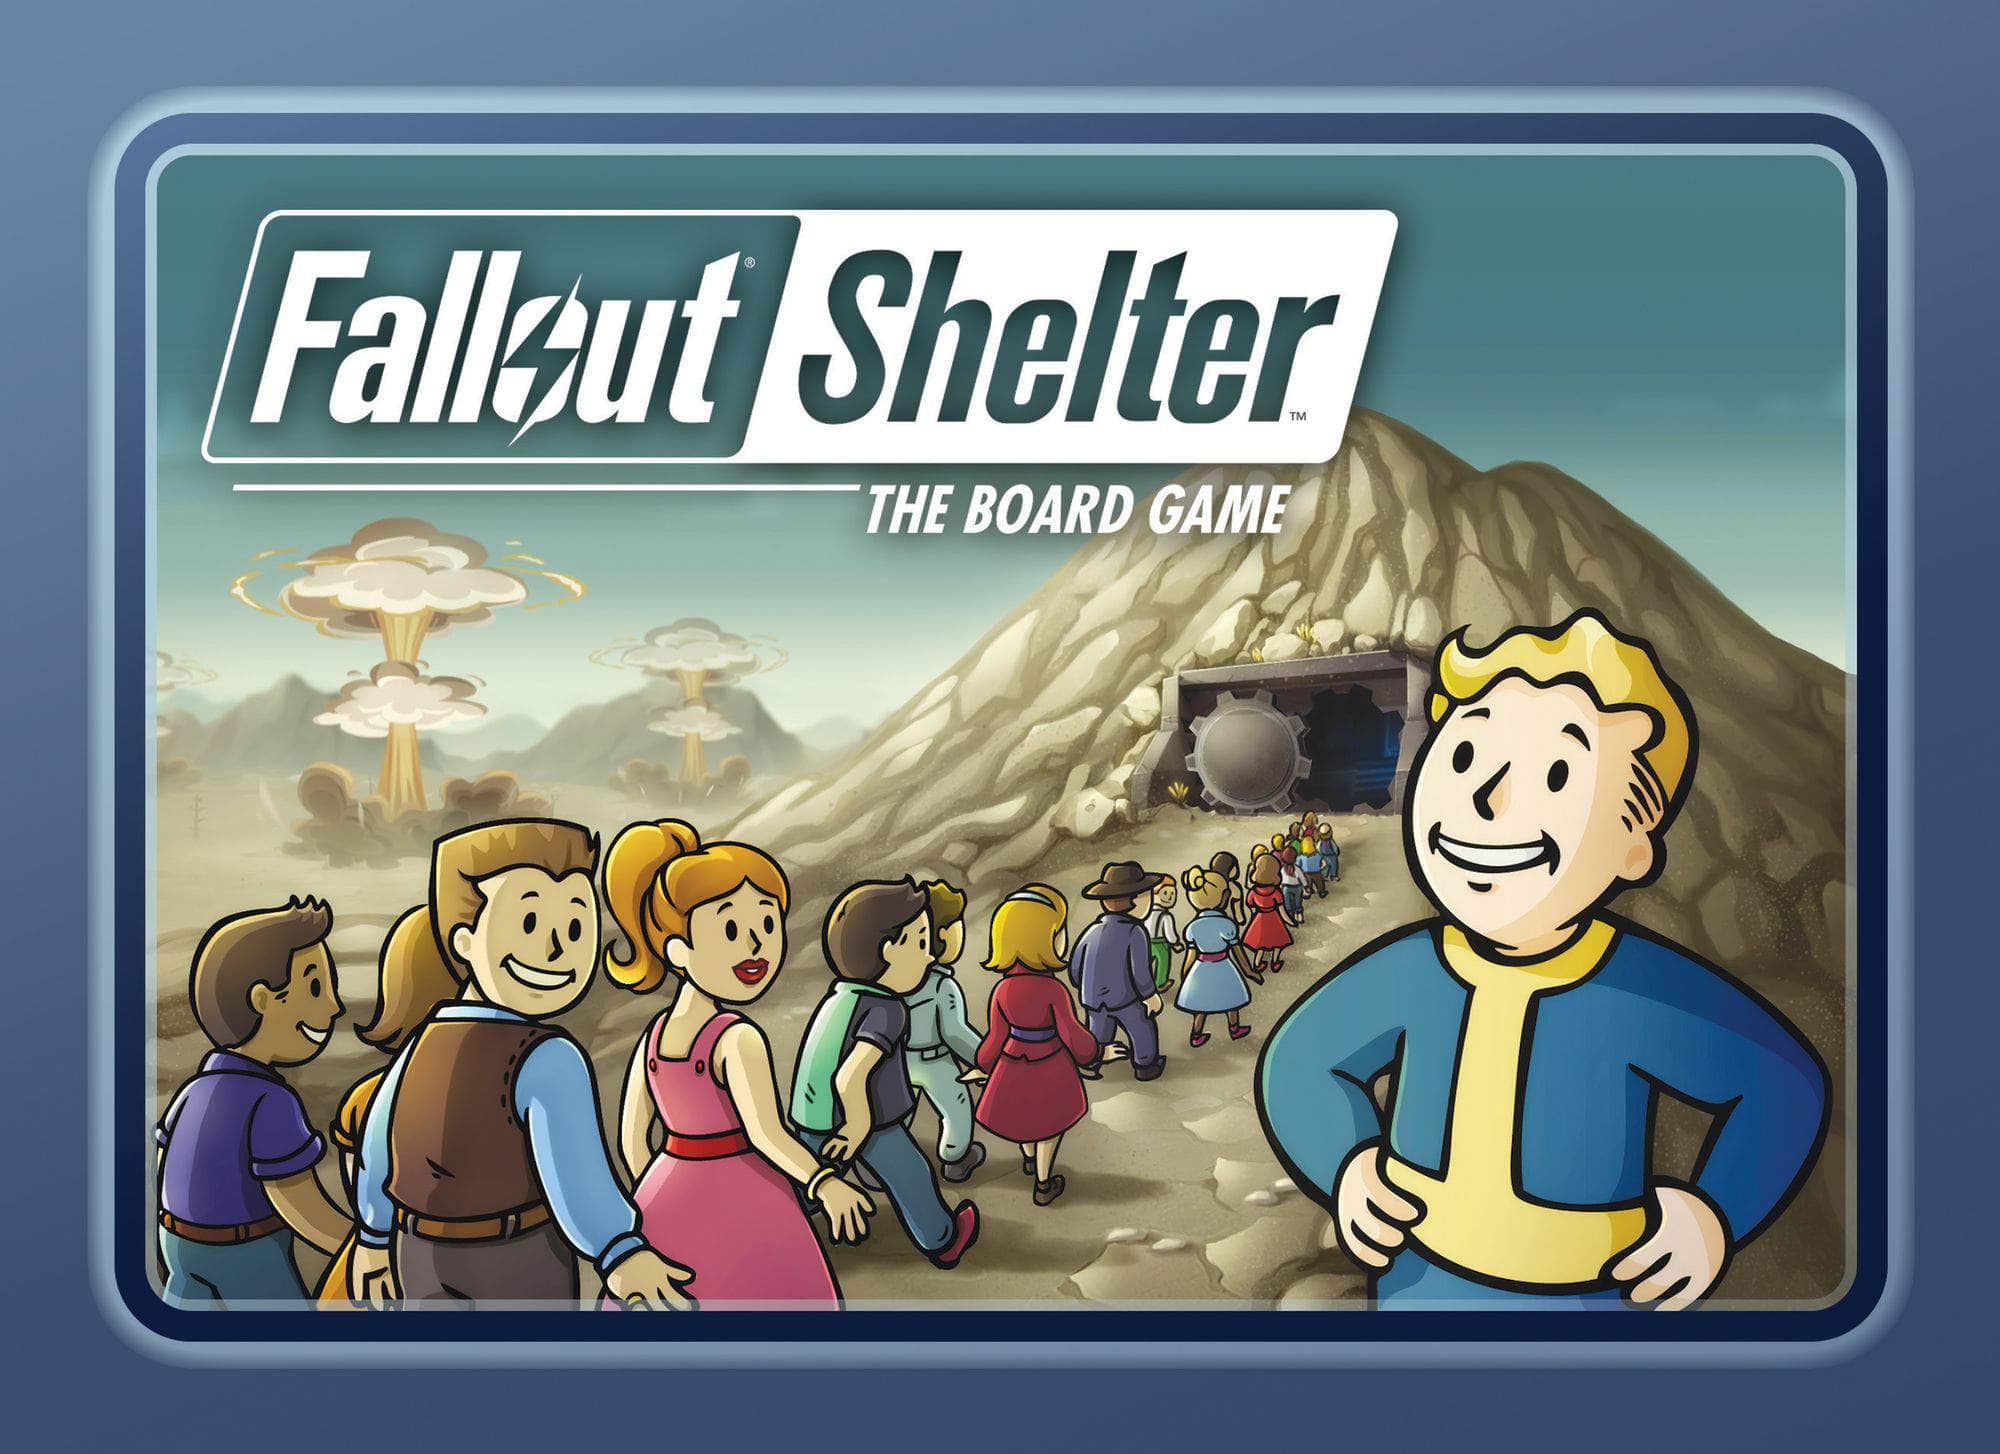 Fallout Shelter (Ding & Dent) (Retail Edition) Retail Board Game Fantasy Flight Games 0841333110765 KS800683A